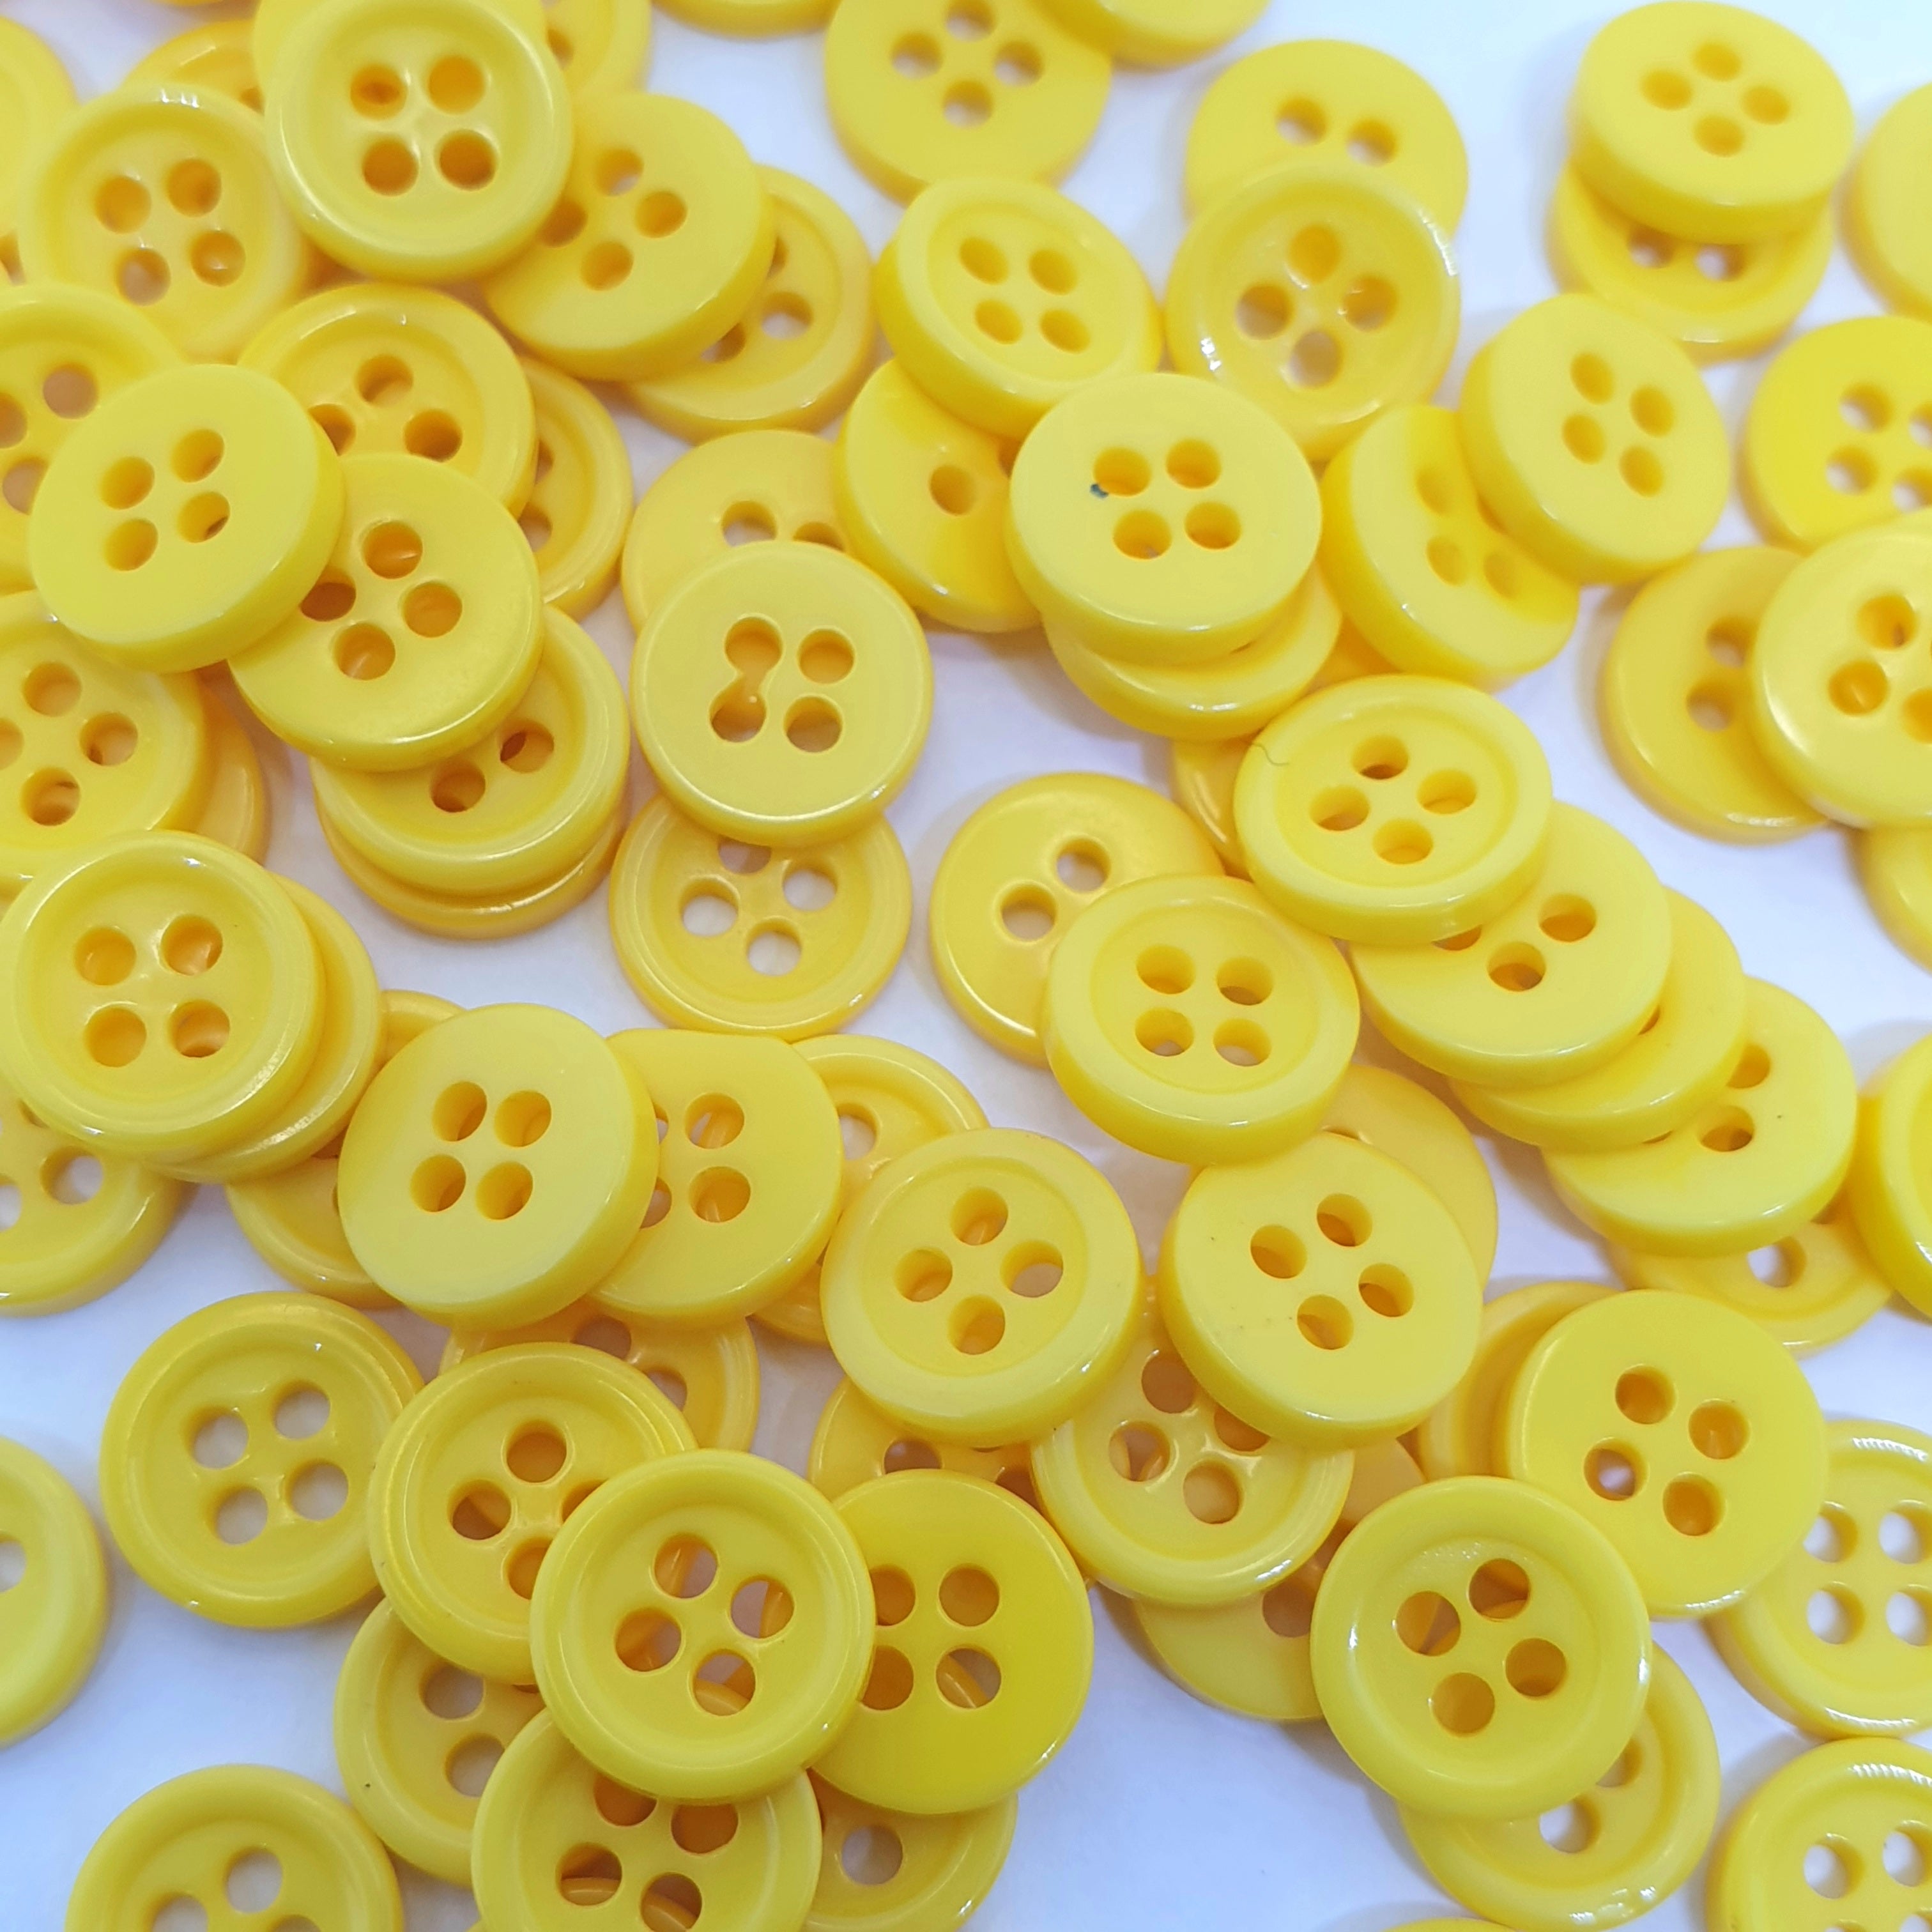 MajorCrafts 120pcs 9mm Tuscan Yellow 4 Holes Small Round Resin Sewing Buttons